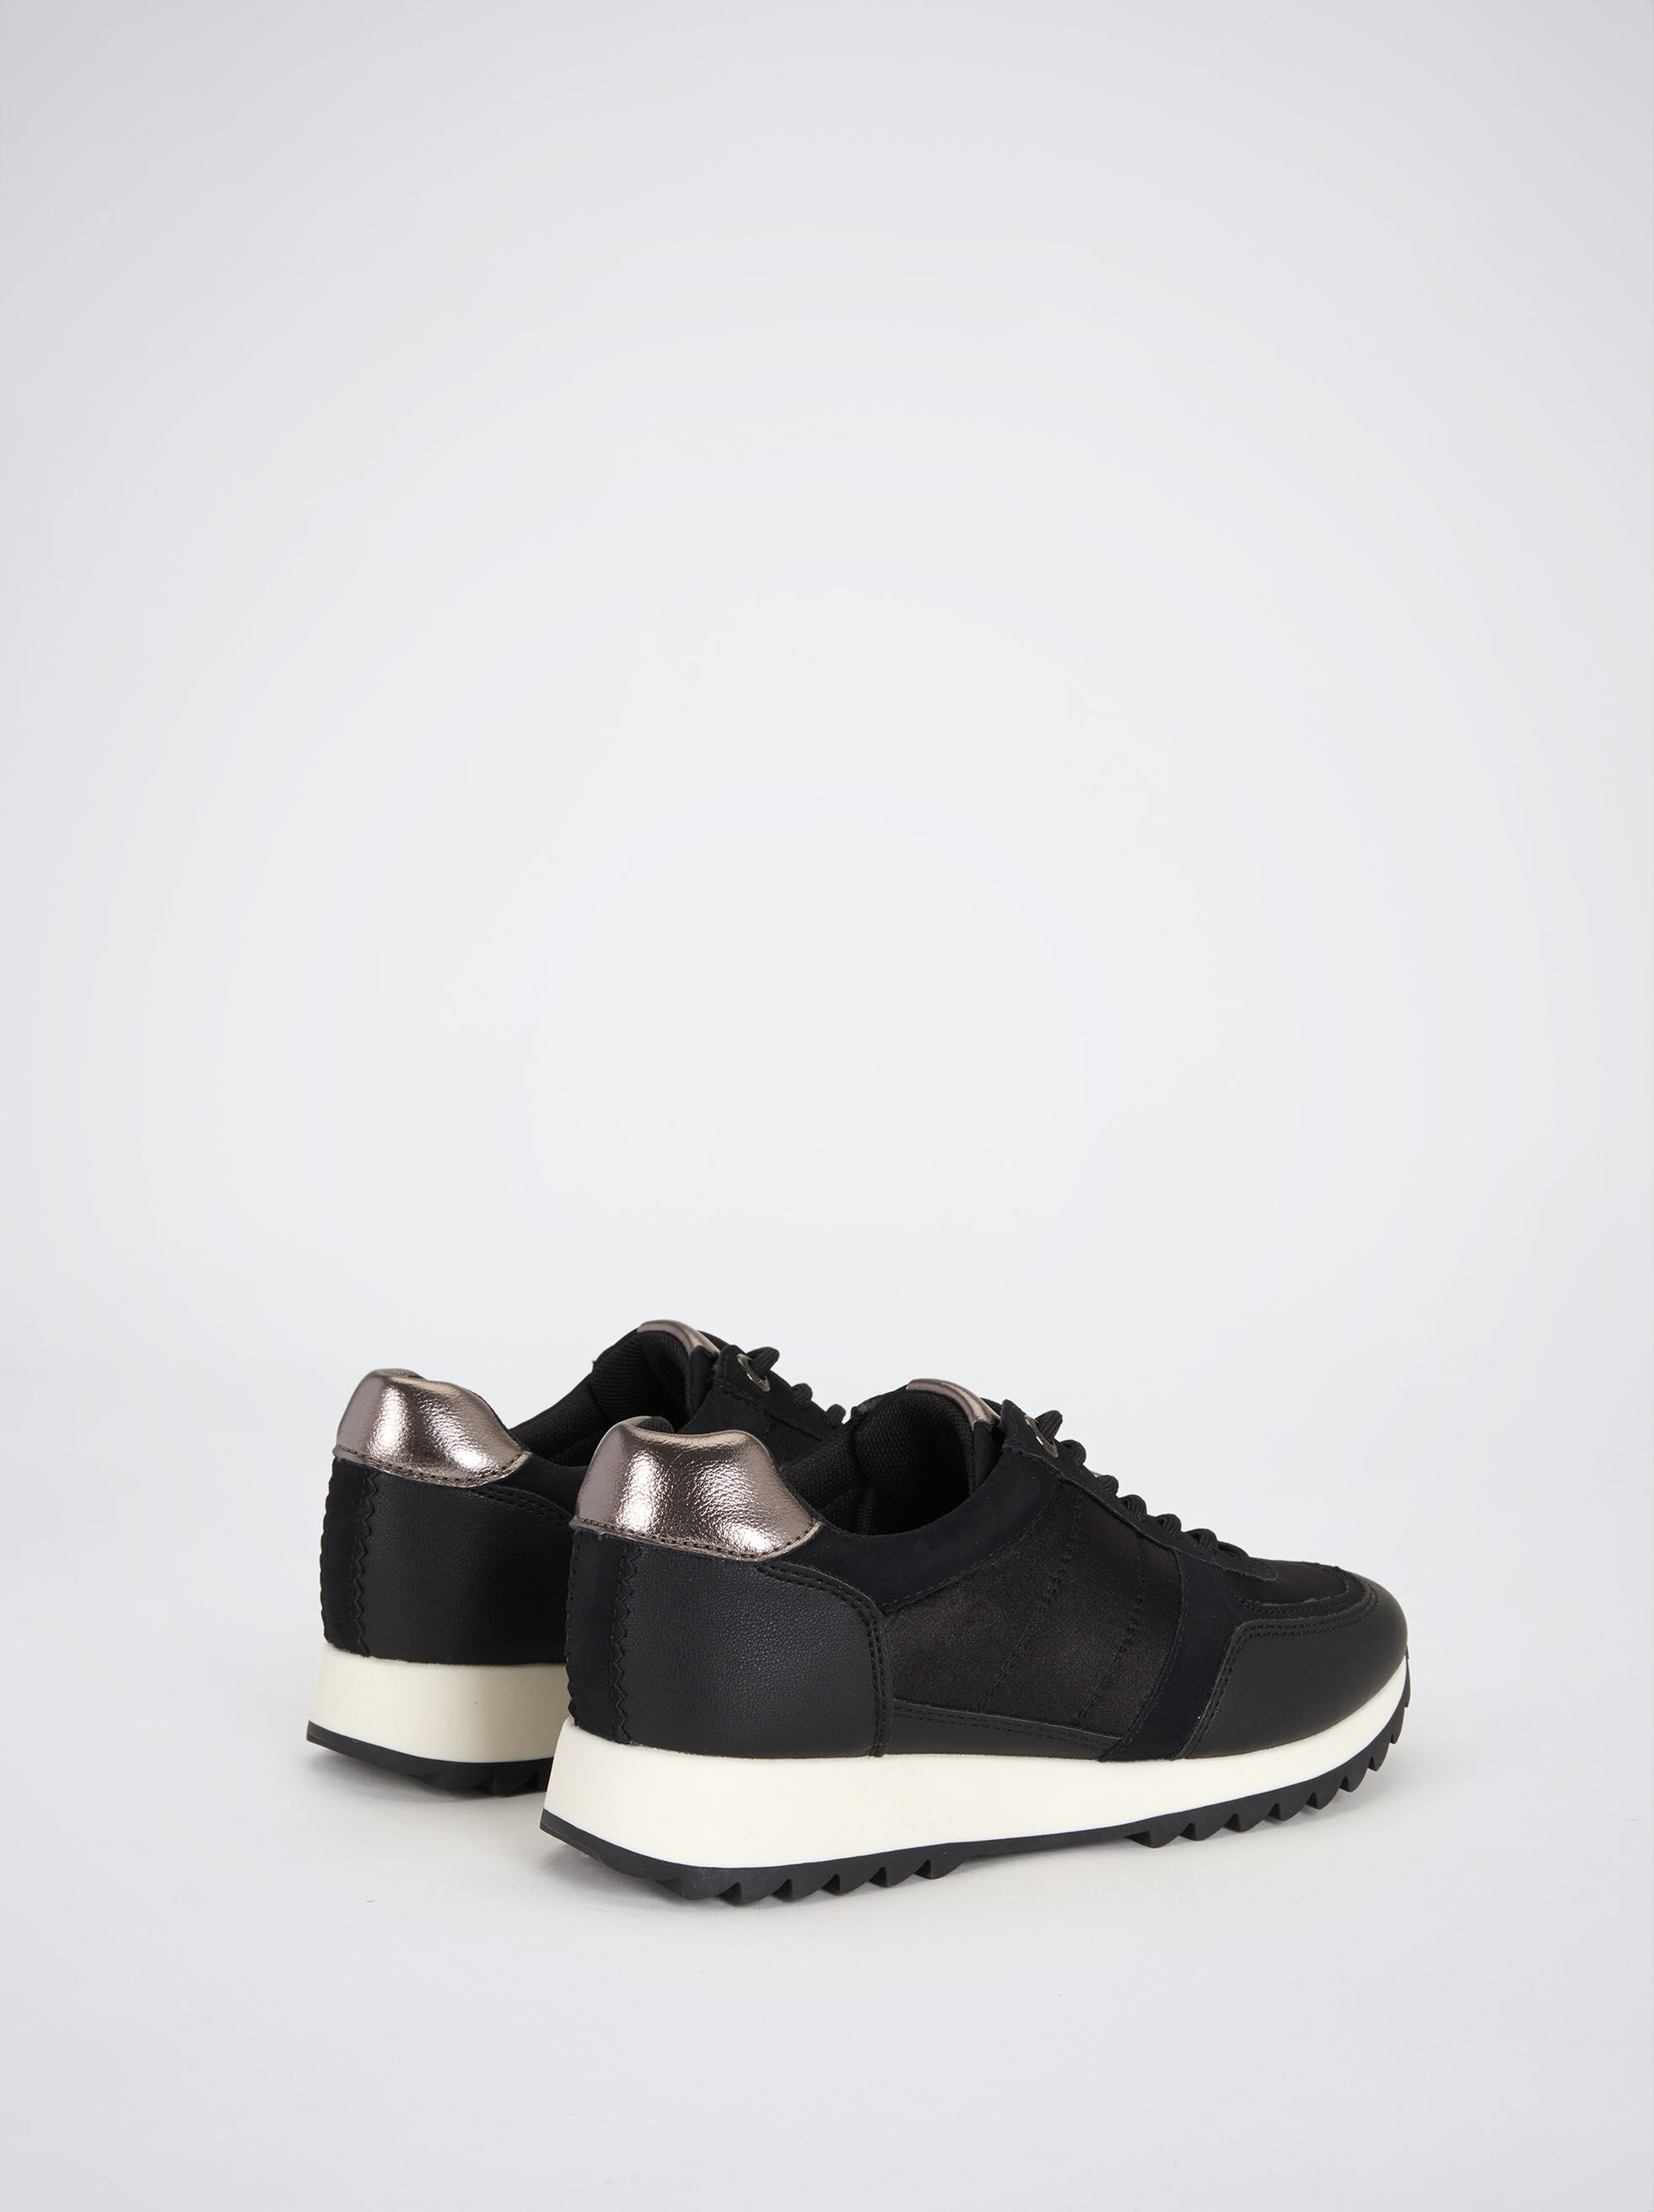 Trainers With Contrast Sole - Black 